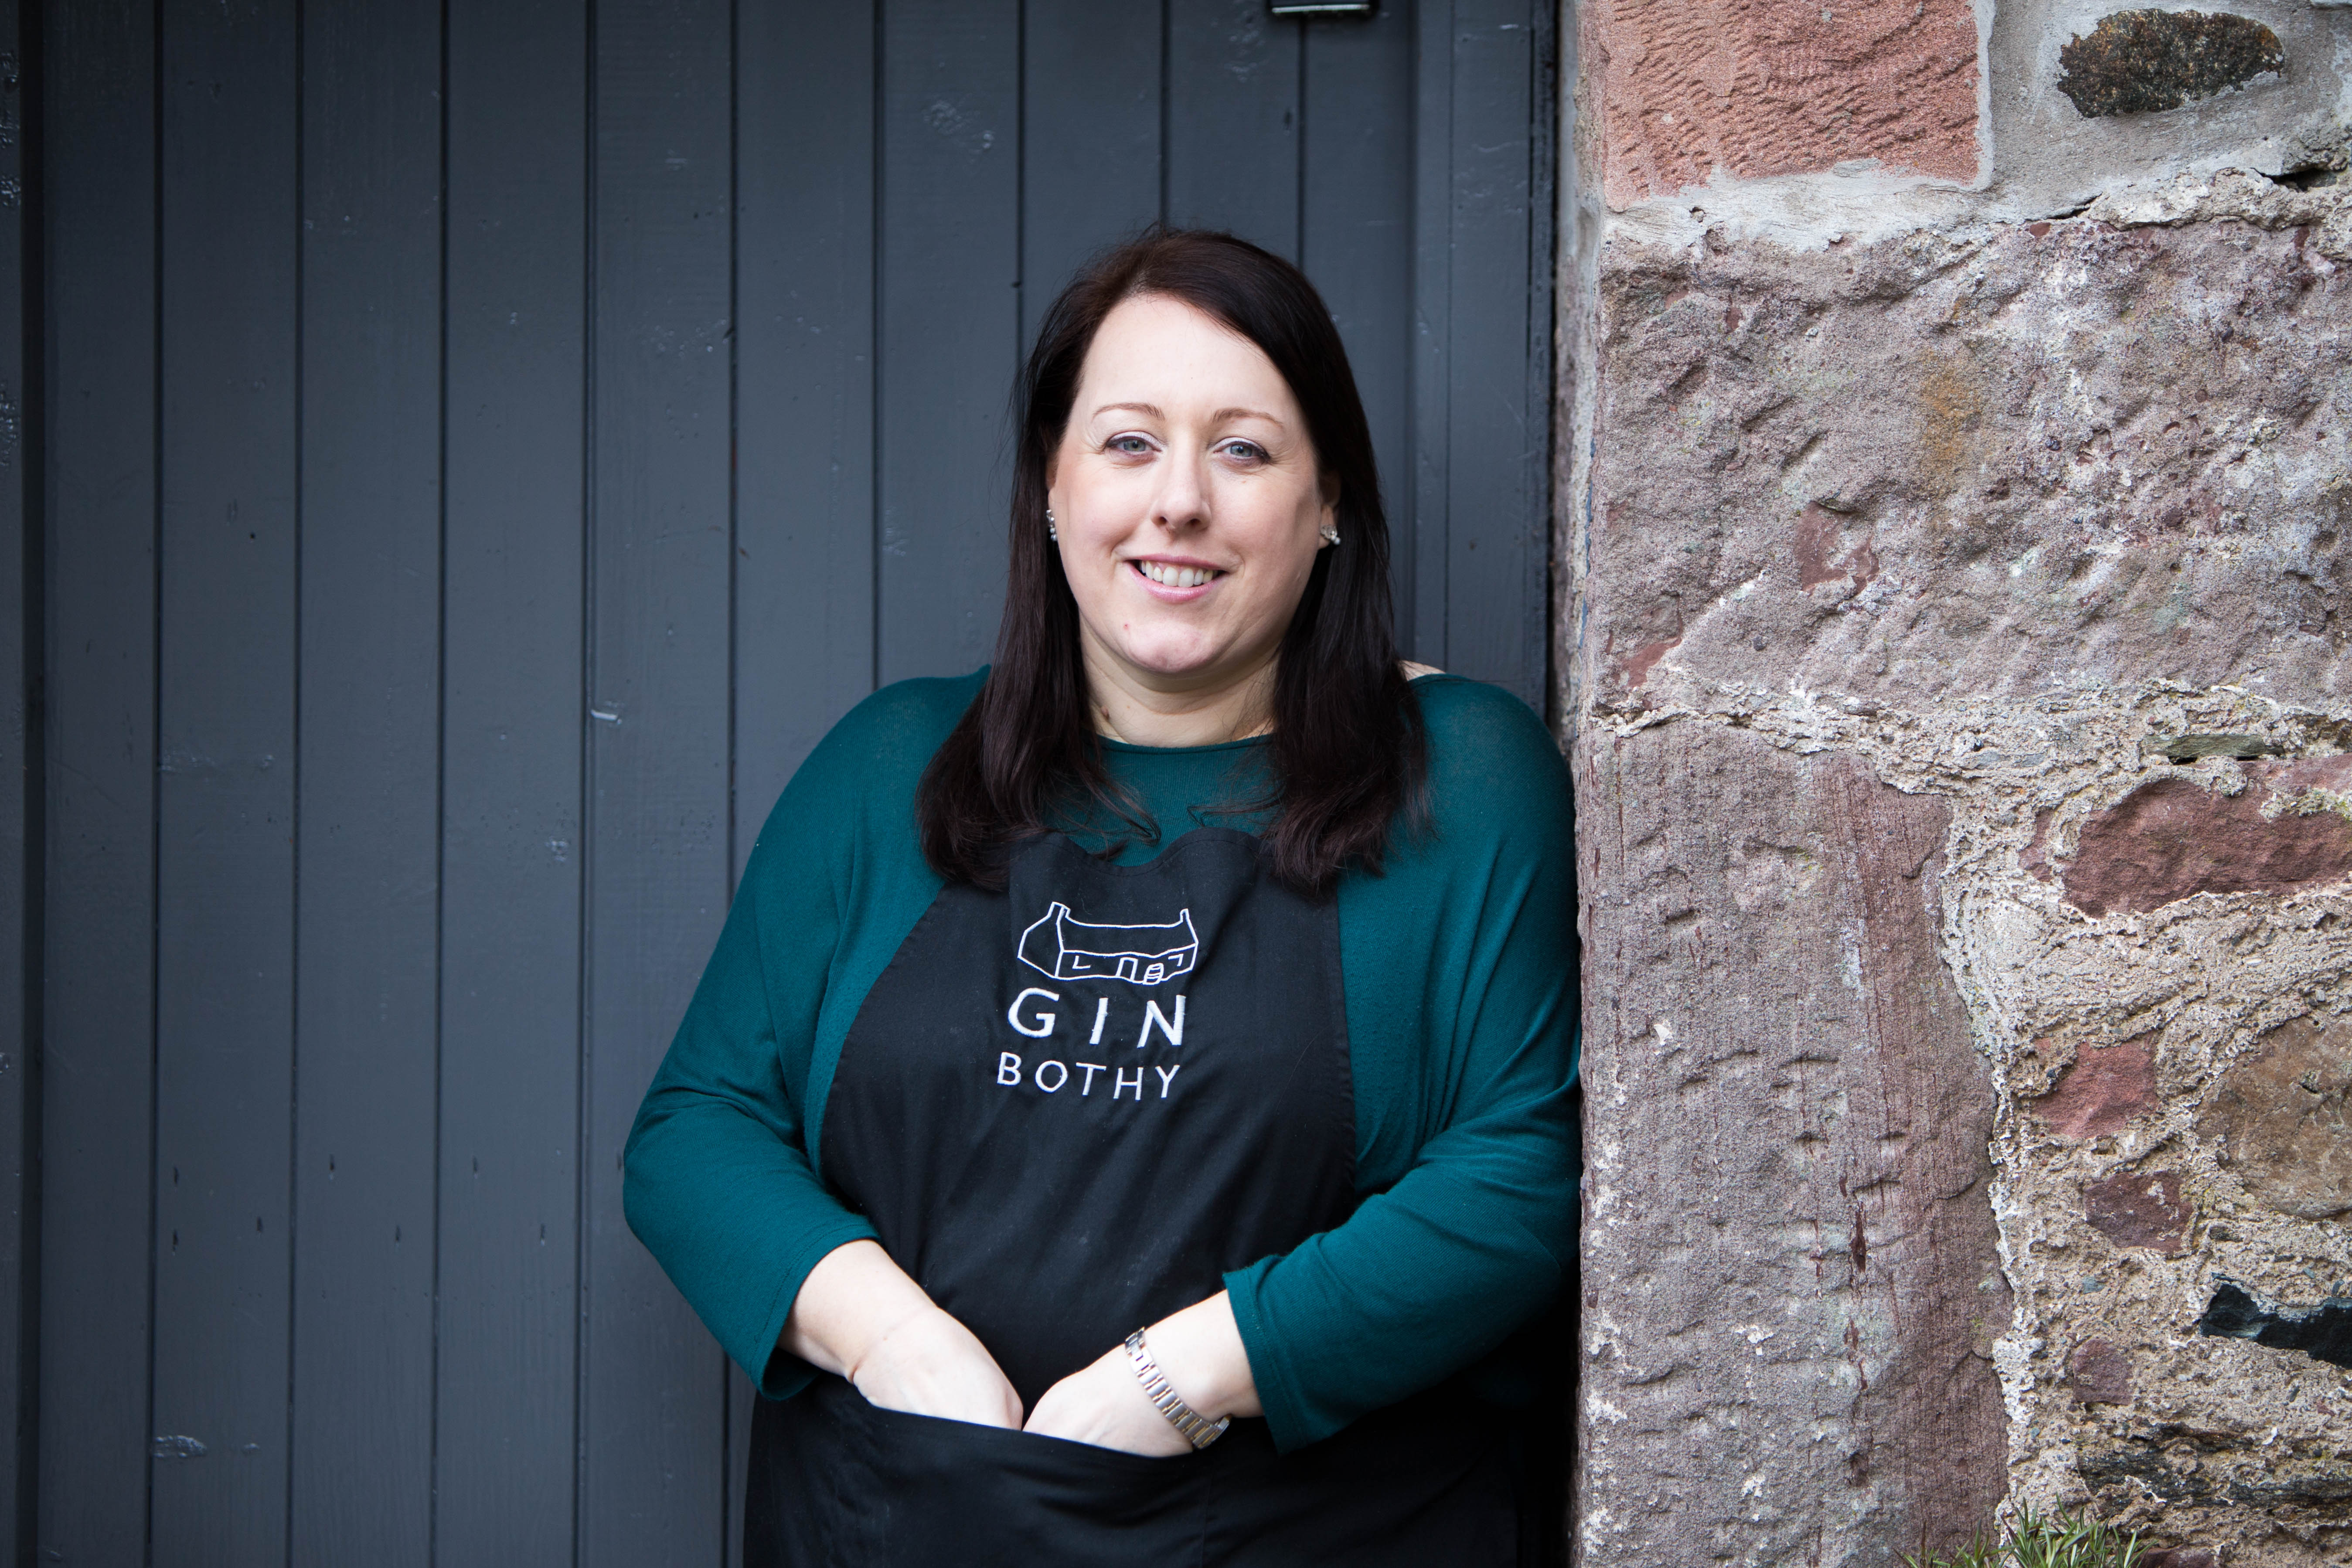 Greenshoots: Gin Bothy expands network across Europe with Swiss & German deal